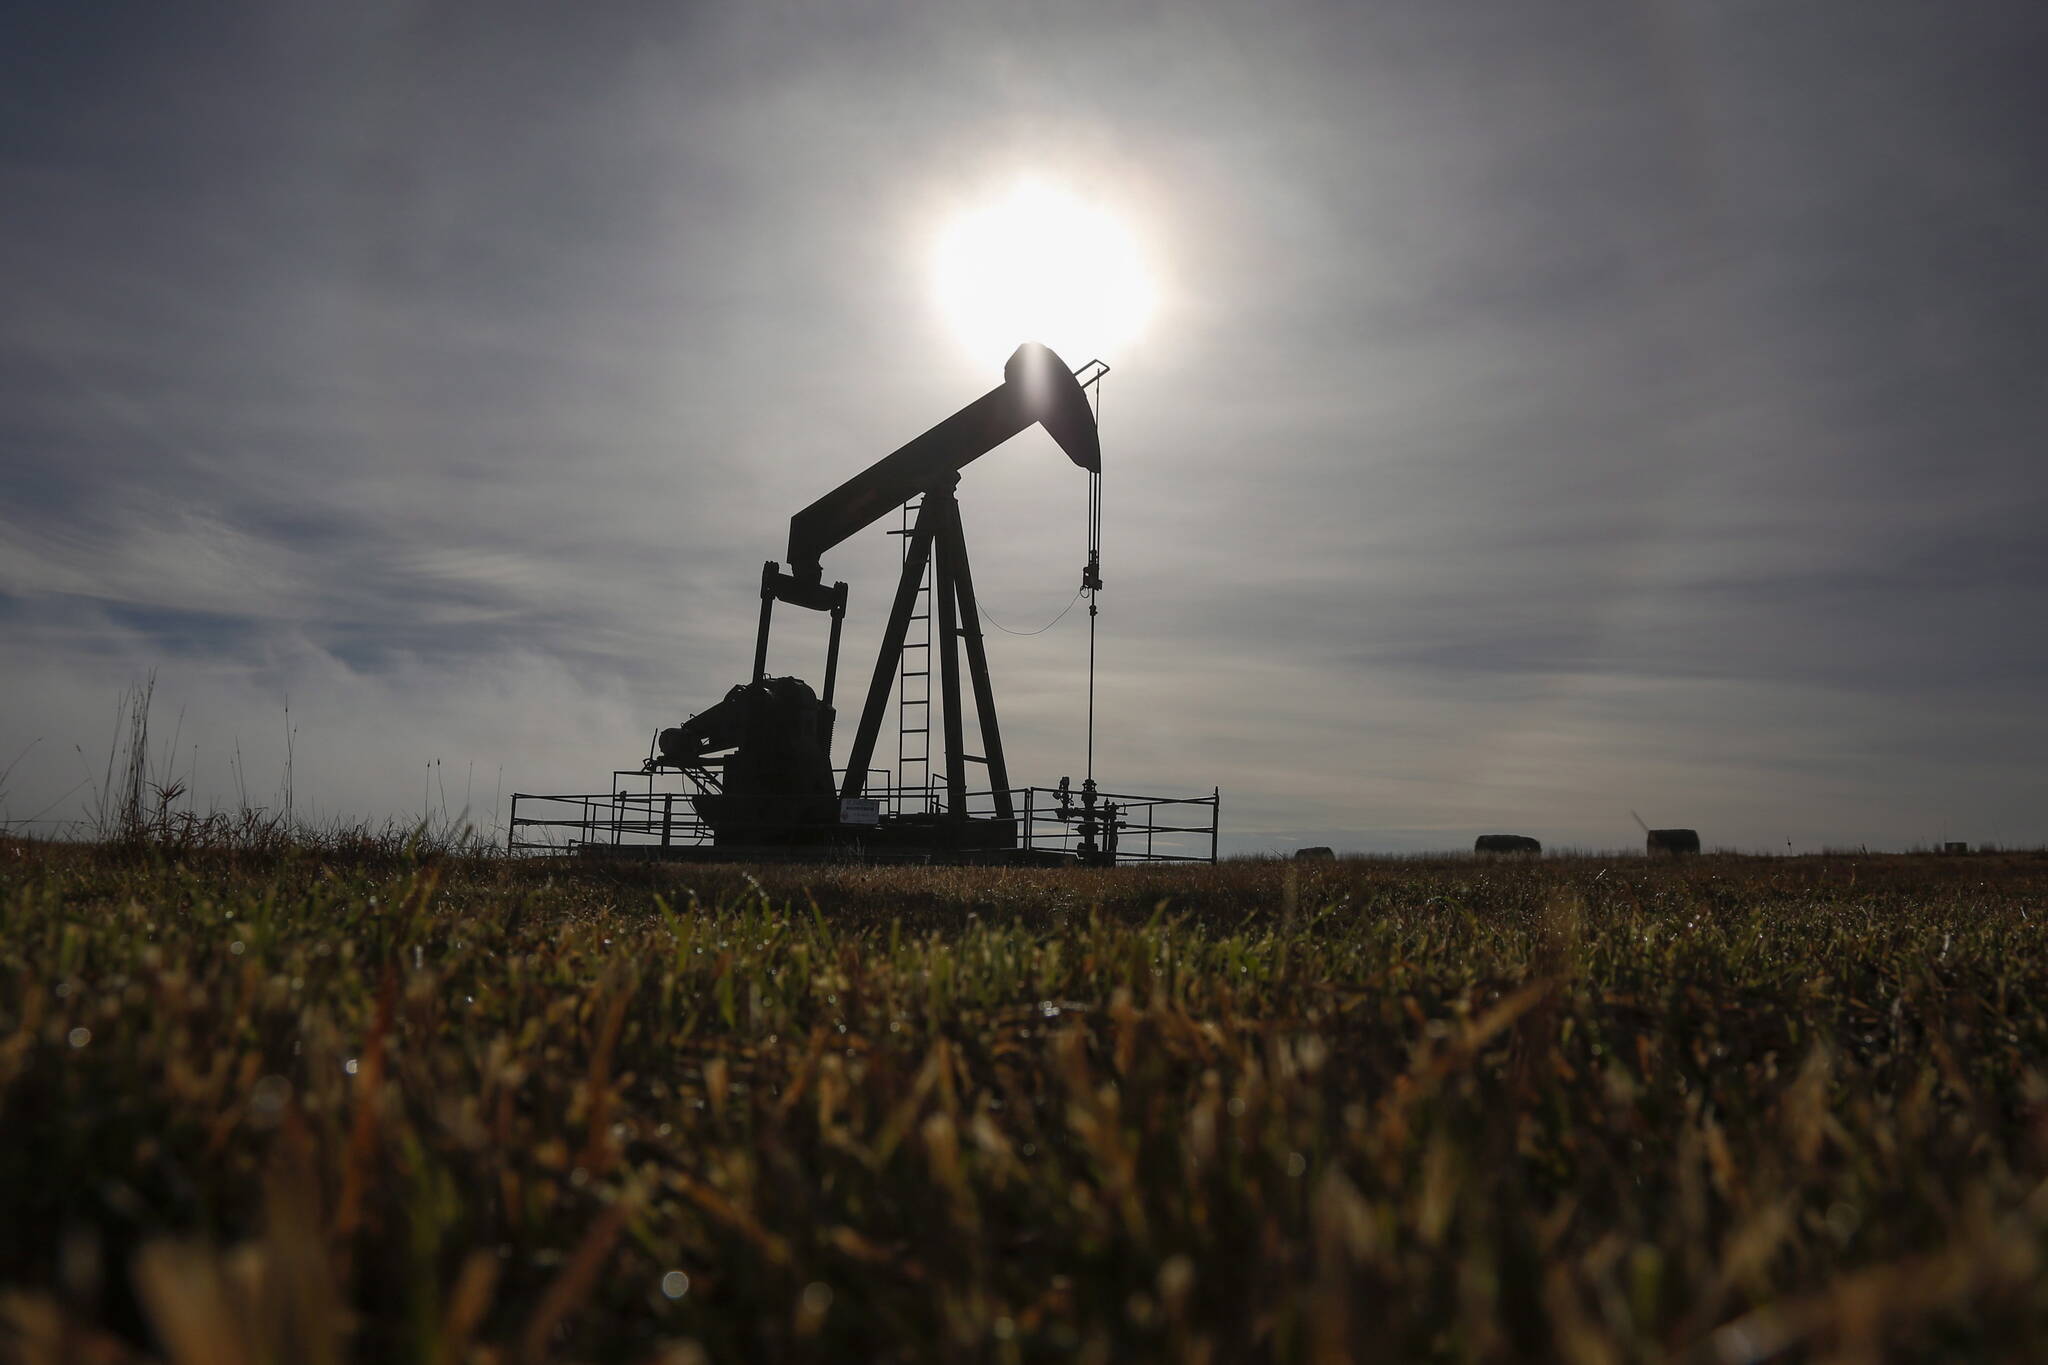 A pumpjack works at a well head on an oil and gas installation near Cremona, Alta., Saturday, Oct. 29, 2016. The Alberta Orphan Well Association says it has taken the "unprecedented" step of having a receiver appointed to manage the oil and gas assets of failed Trident Exploration. THE CANADIAN PRESS/Jeff McIntosh